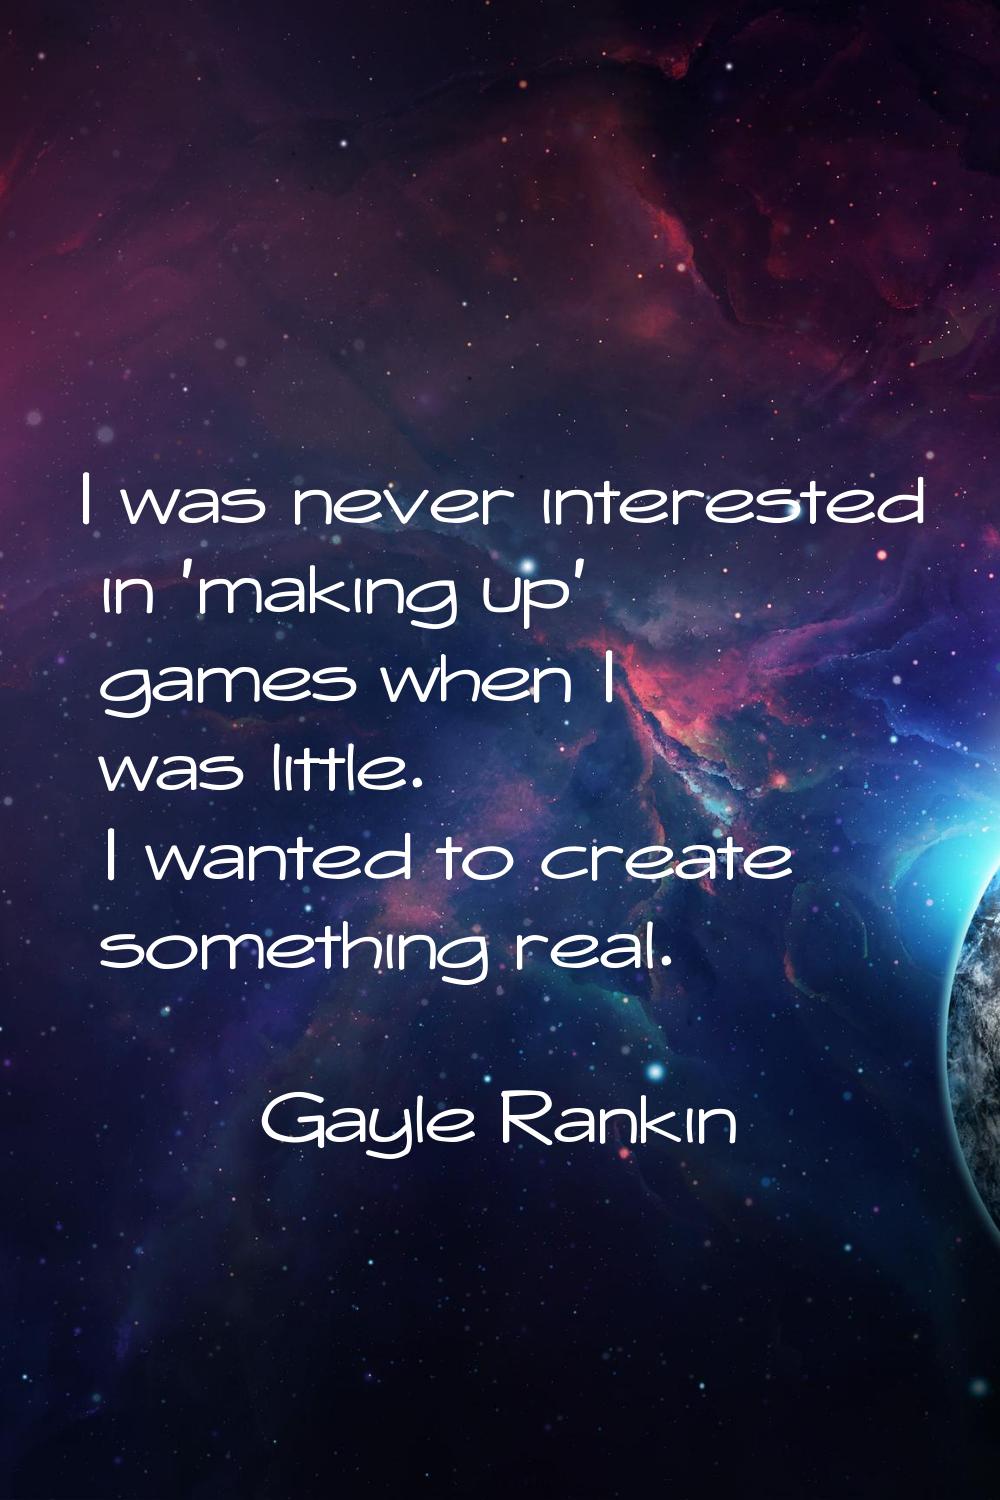 I was never interested in 'making up' games when I was little. I wanted to create something real.